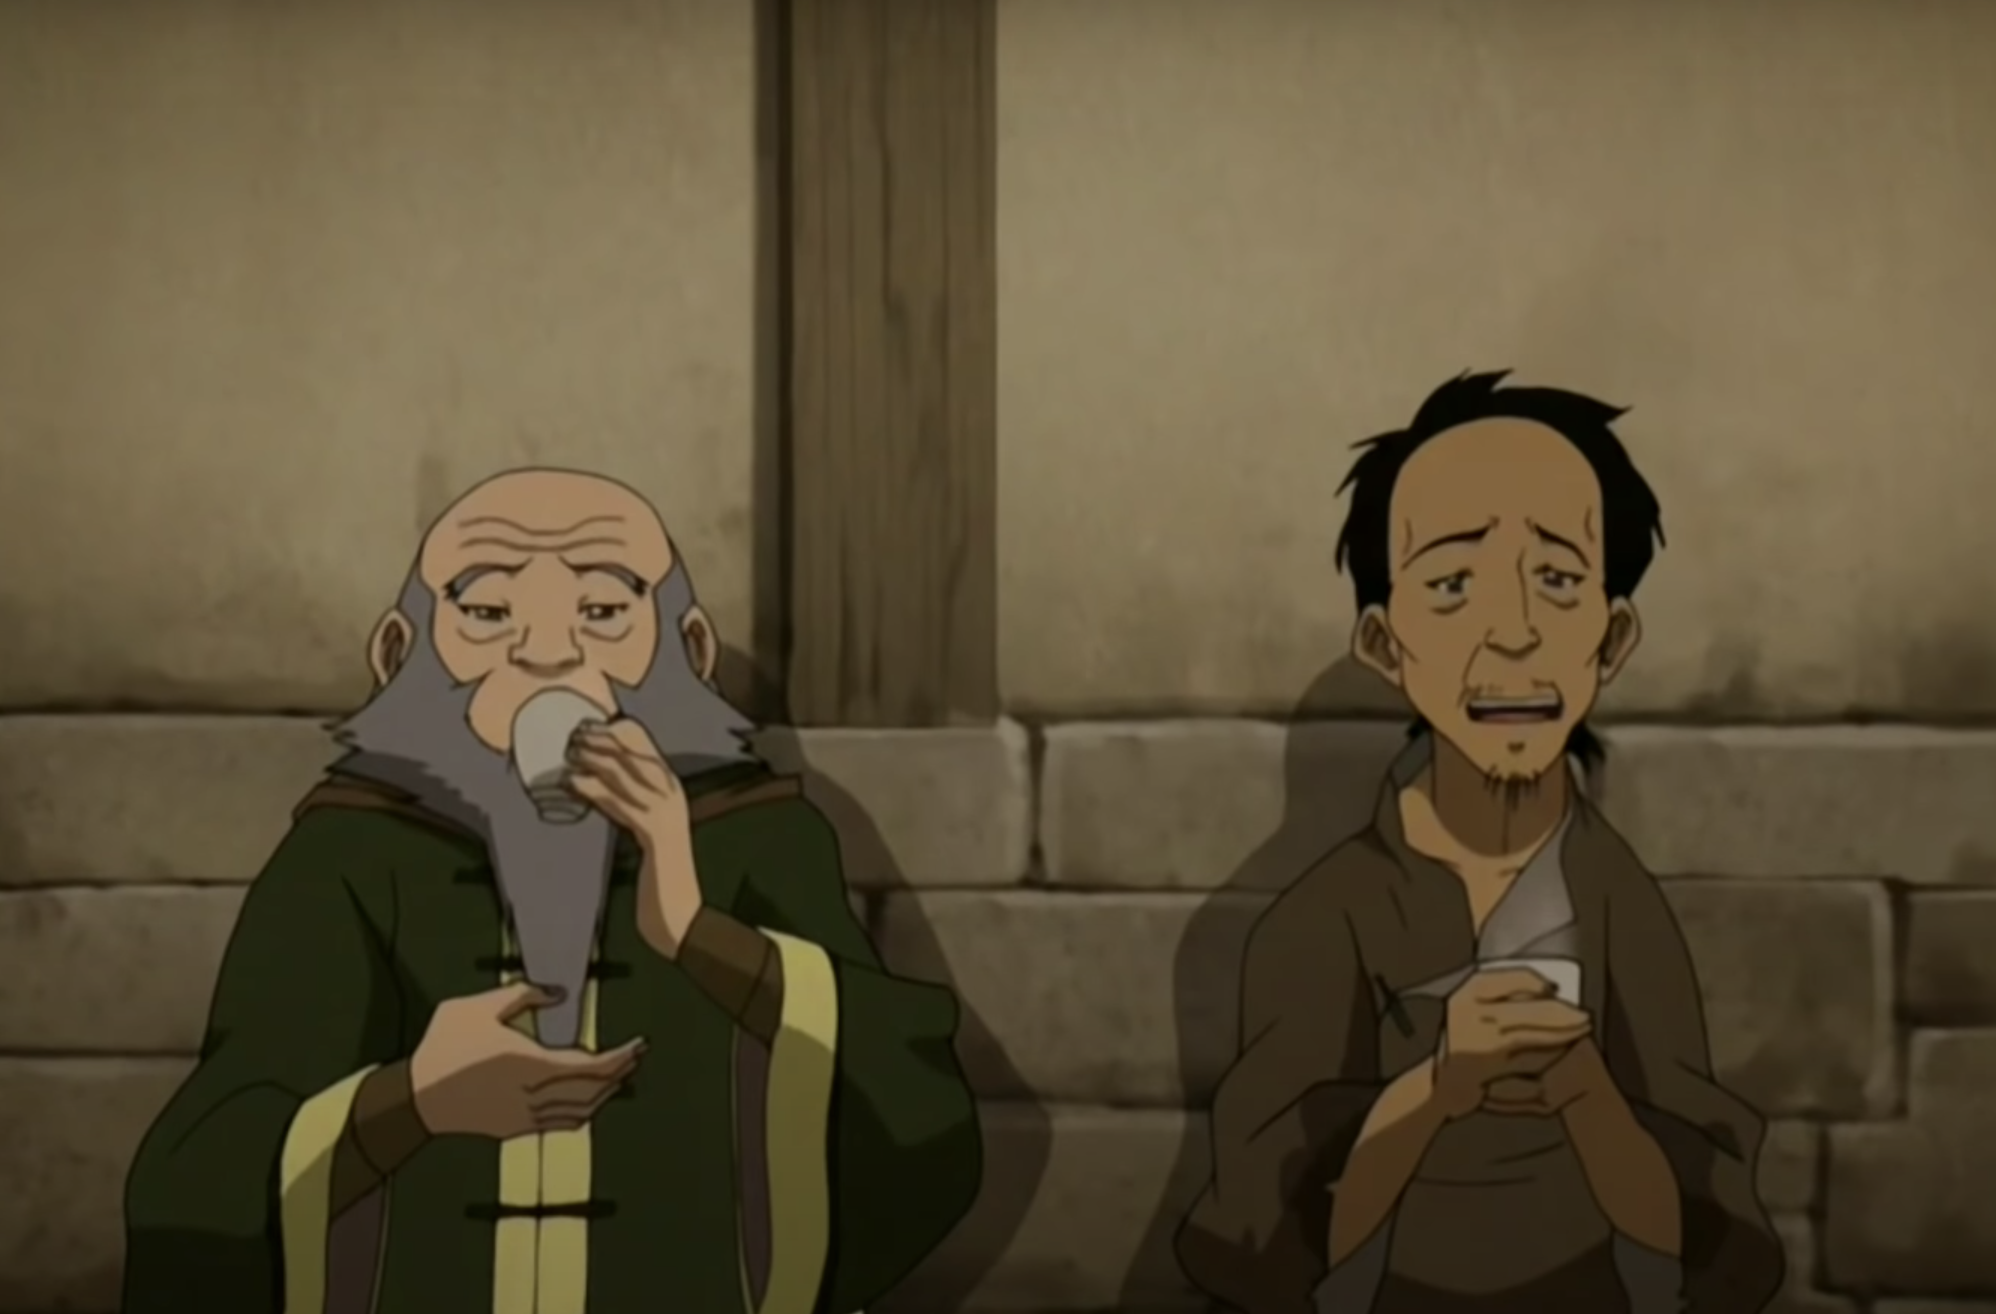 Iroh and a man who earlier tried to mug him drinking tea together